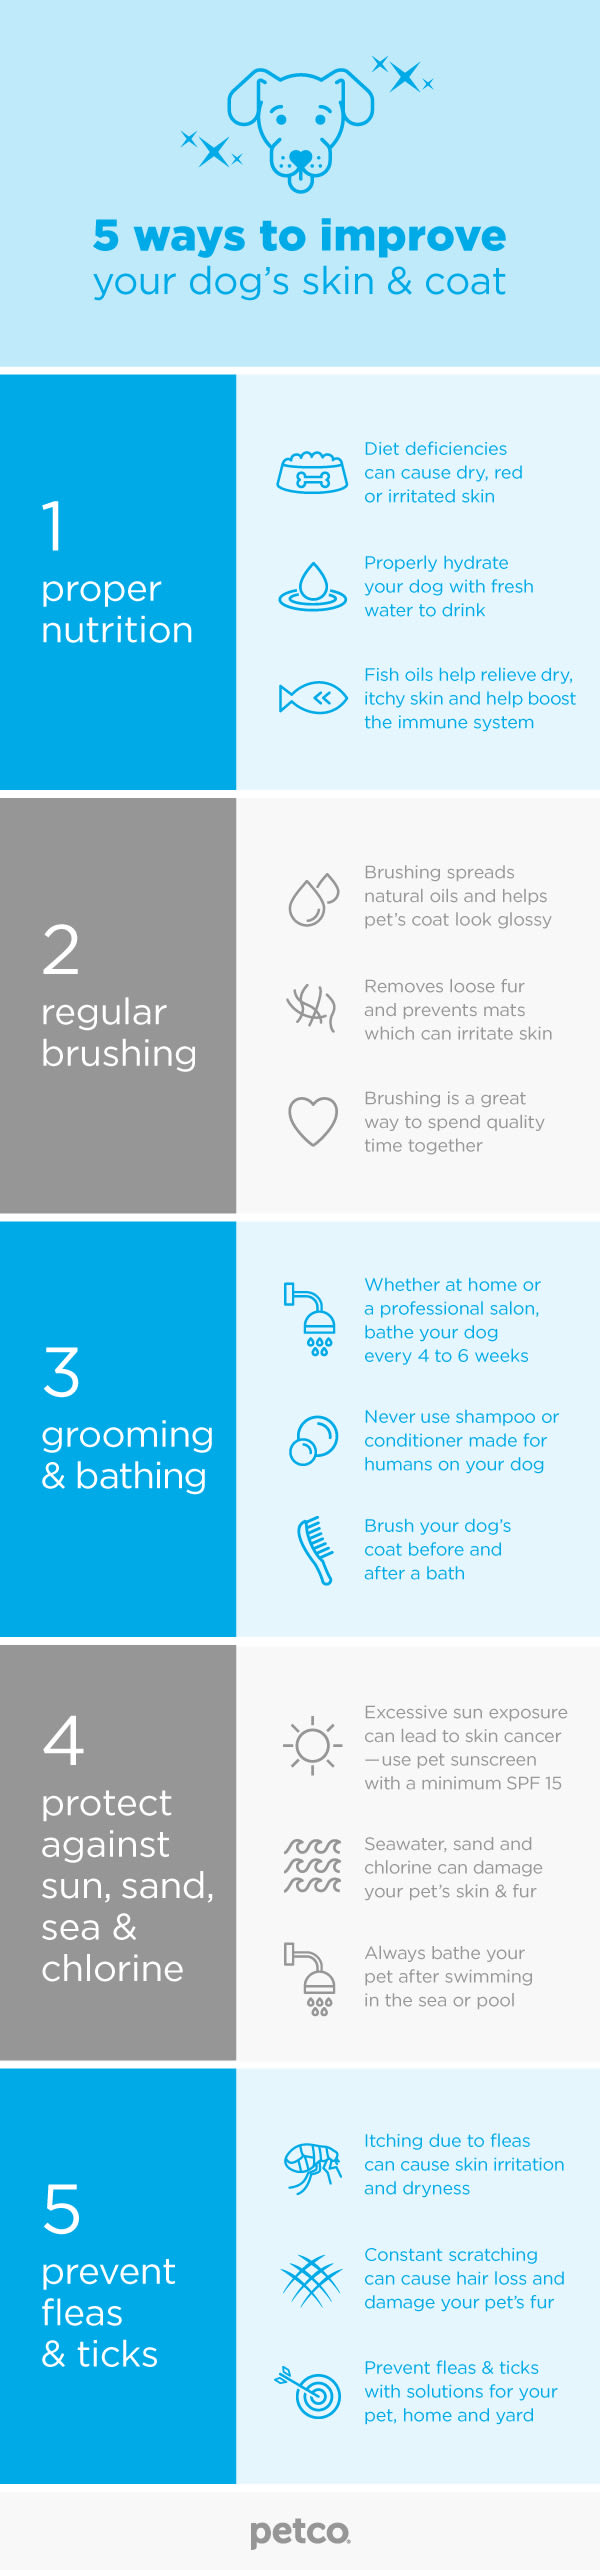 Ways to improve a dog's skin and coat infographic